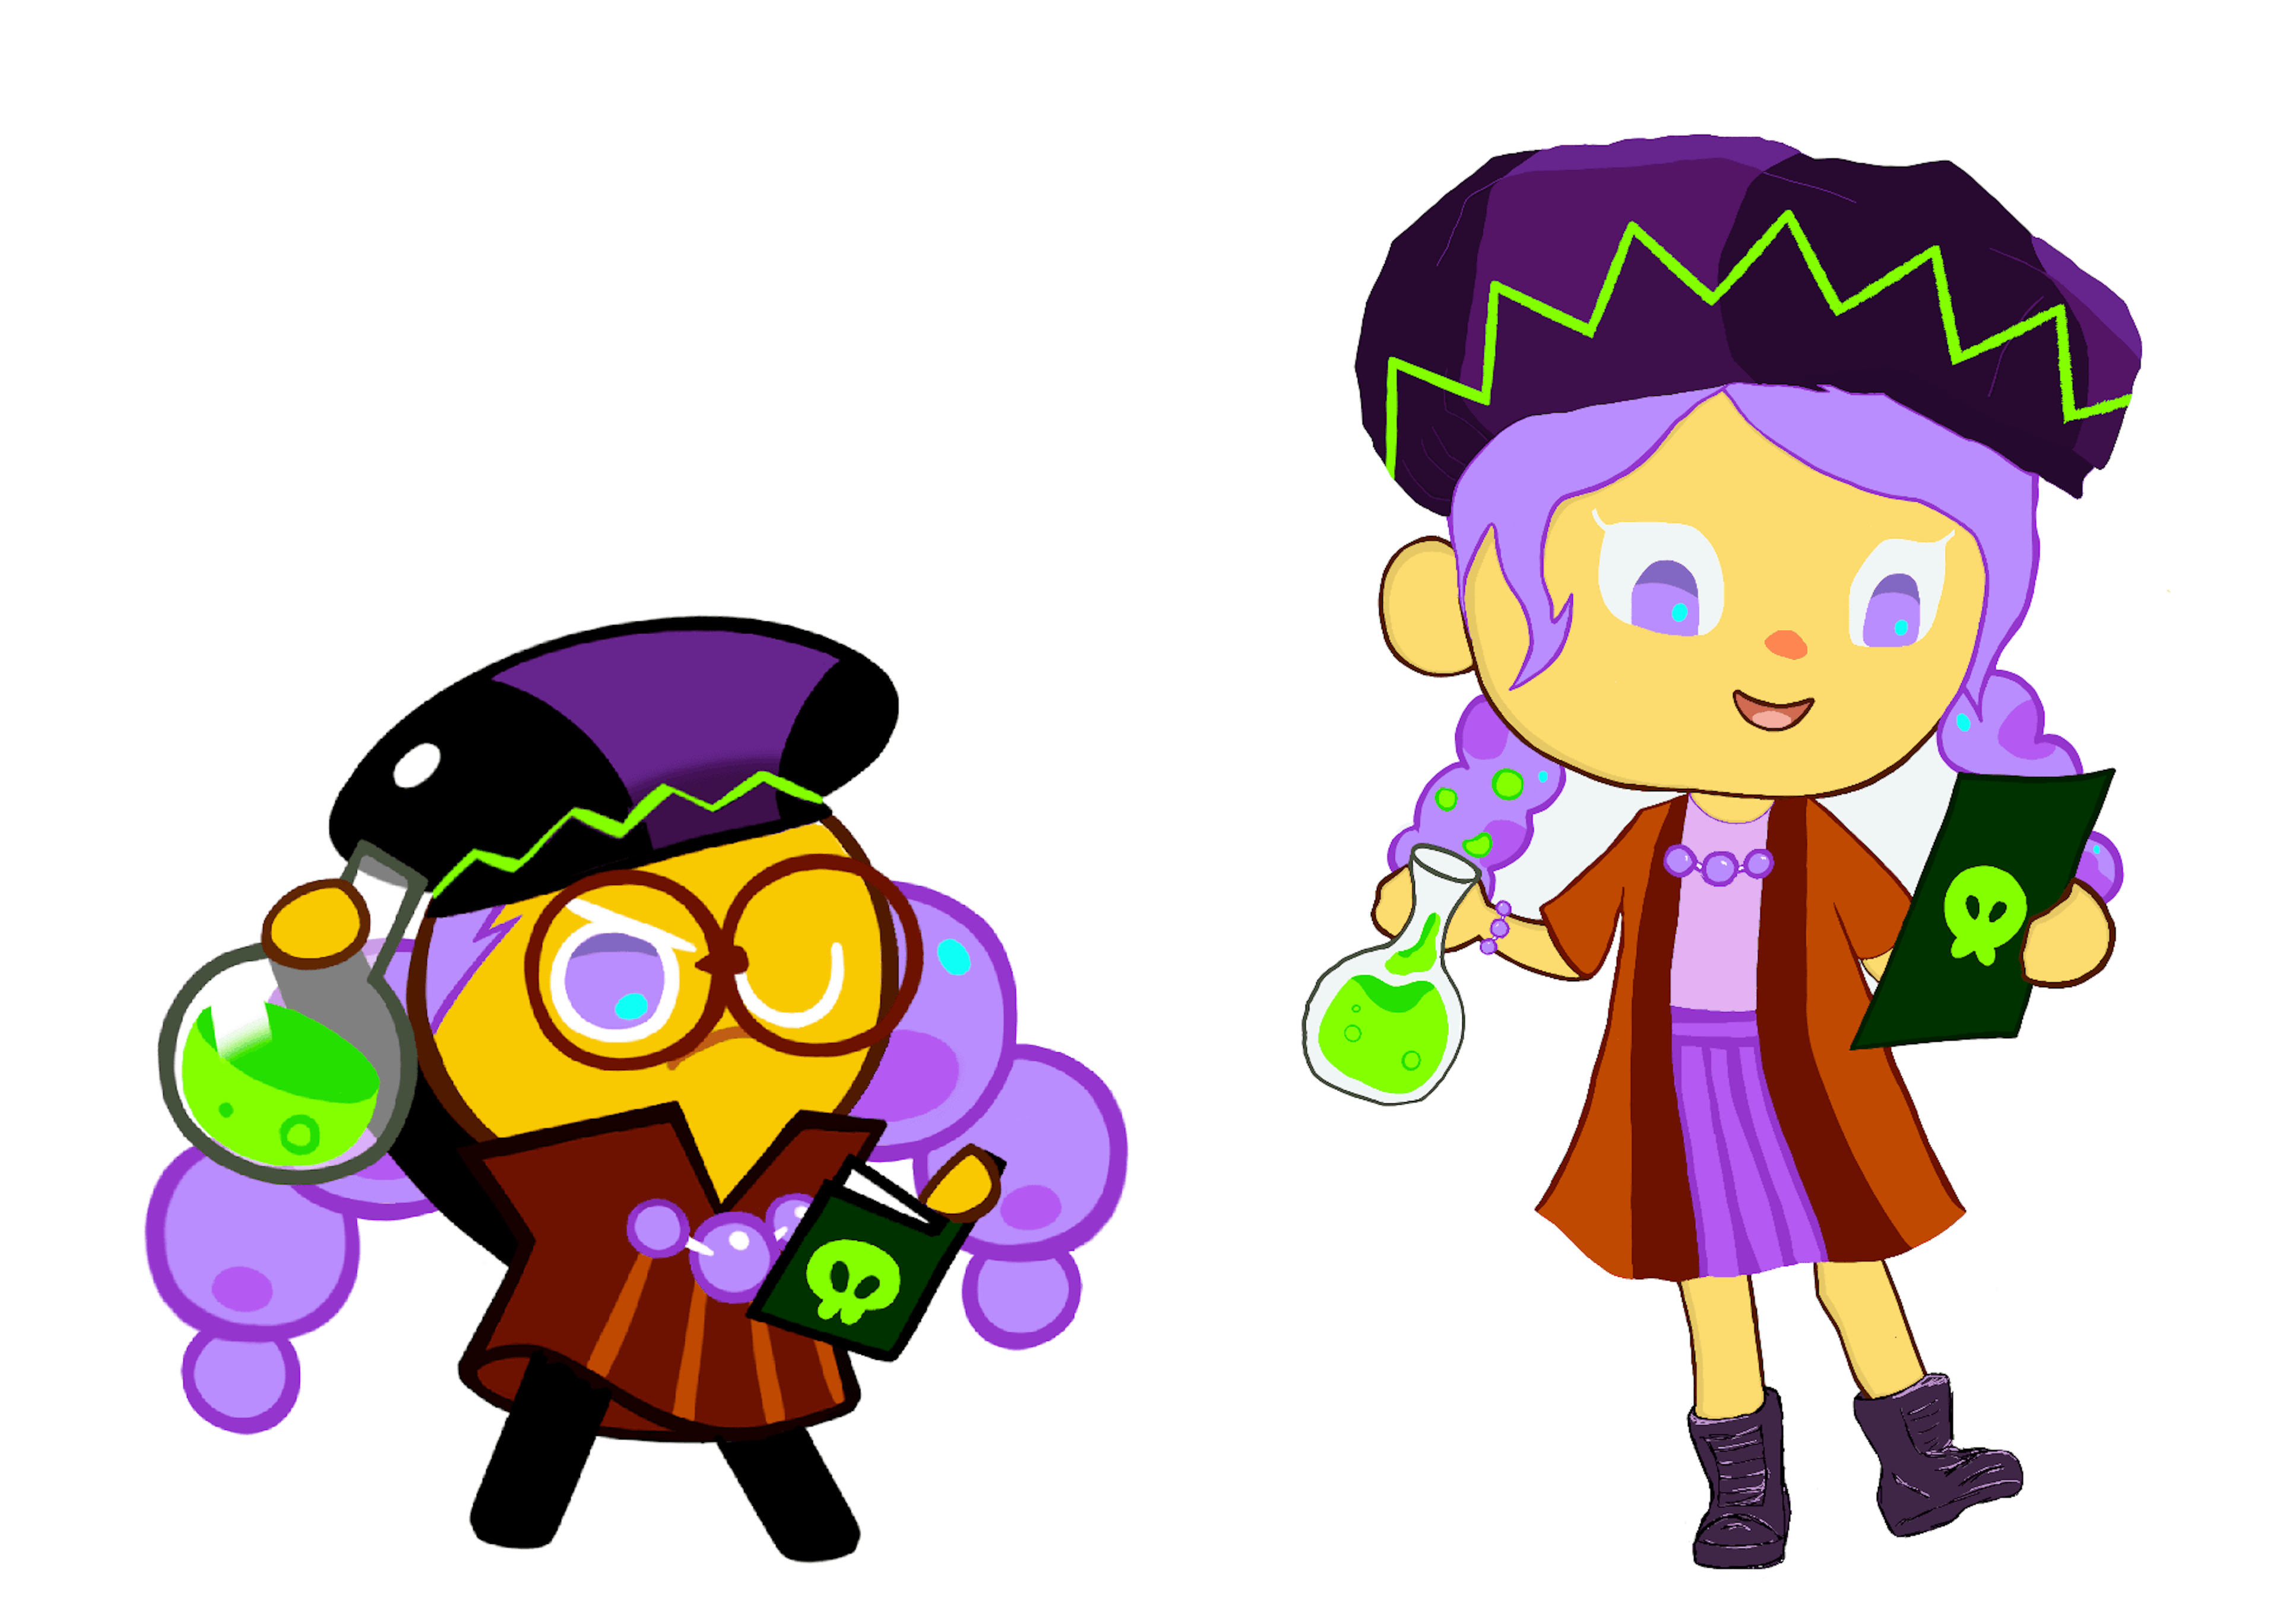 This image displays the original Alchemy Cookie design on the left, alongside its new interpretation in the Animal Crossing style on the right. Using a similar colour palette and keeping key elements allowed me to keep essences of the original while creating a new visual style.